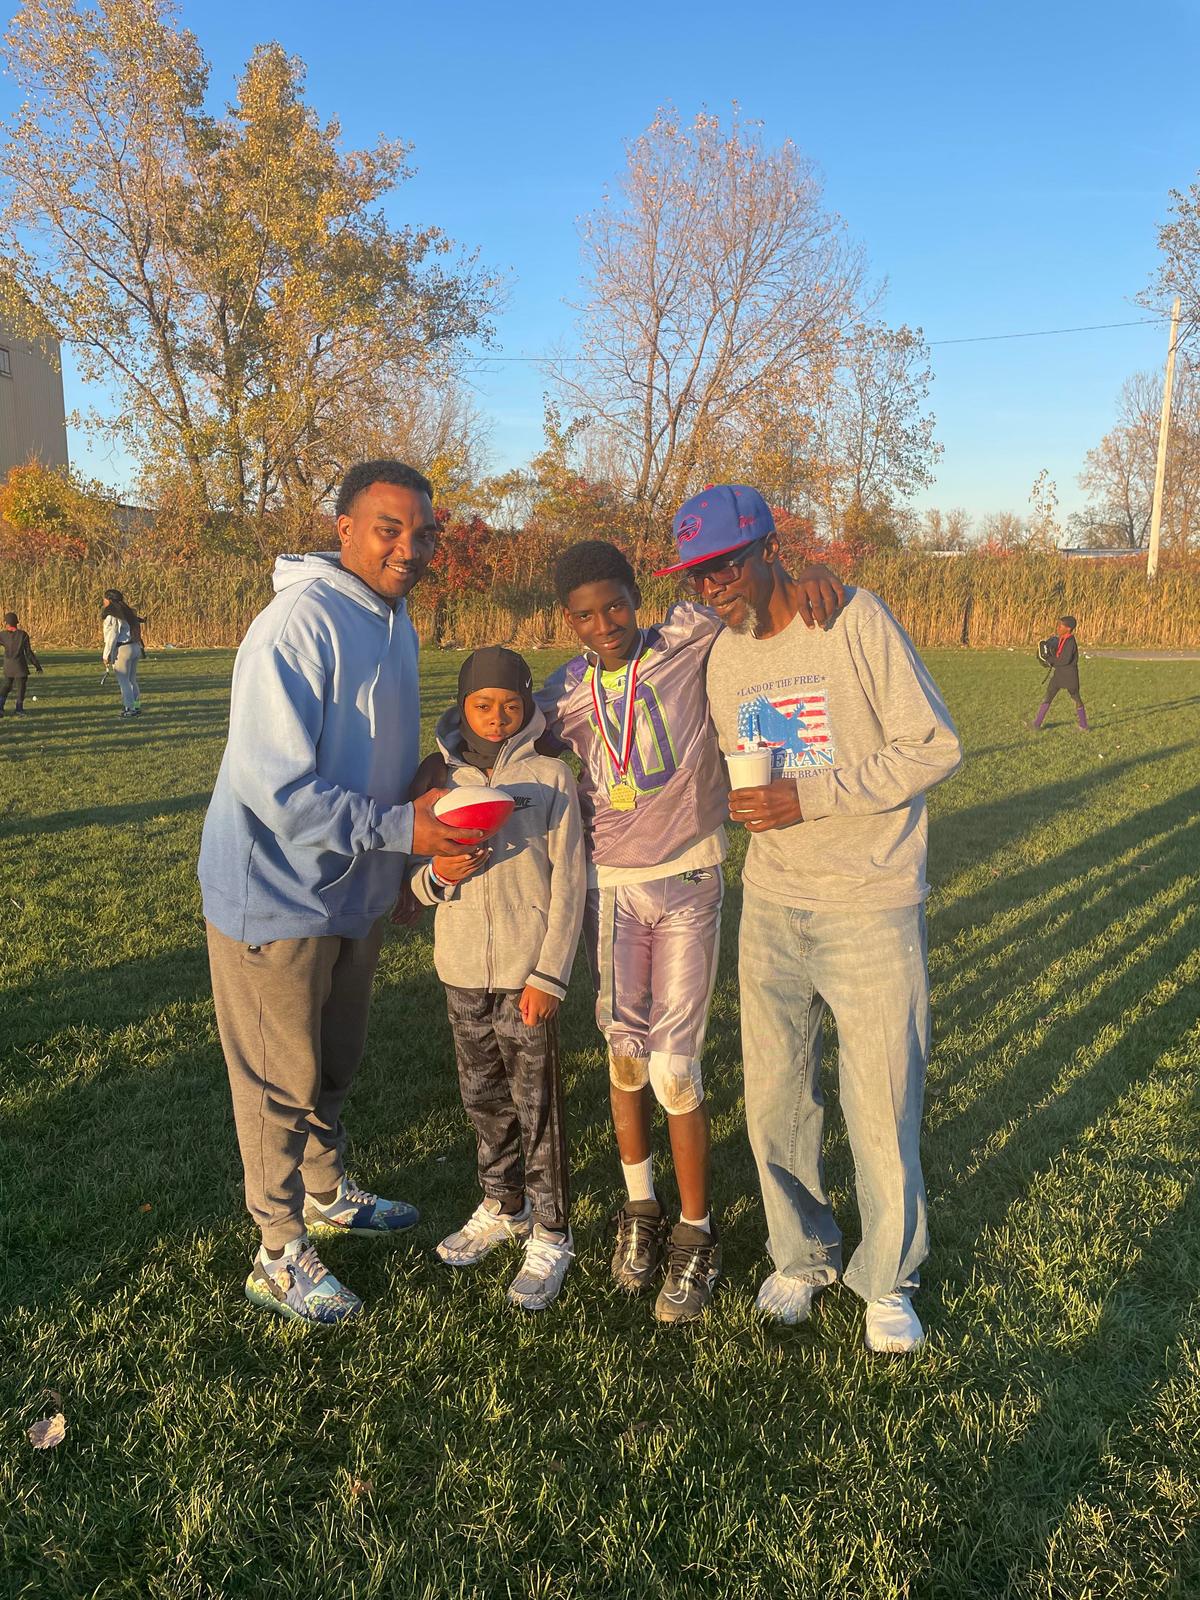 (L-R) Bryant Brown Jr, Romello "Mello" Early, Melvin Anderson, and Wesley Anderson after Melvin's football game. (Courtesy of <a href="https://www.facebook.com/bryantb2">Bryant Brown Jr.</a>)